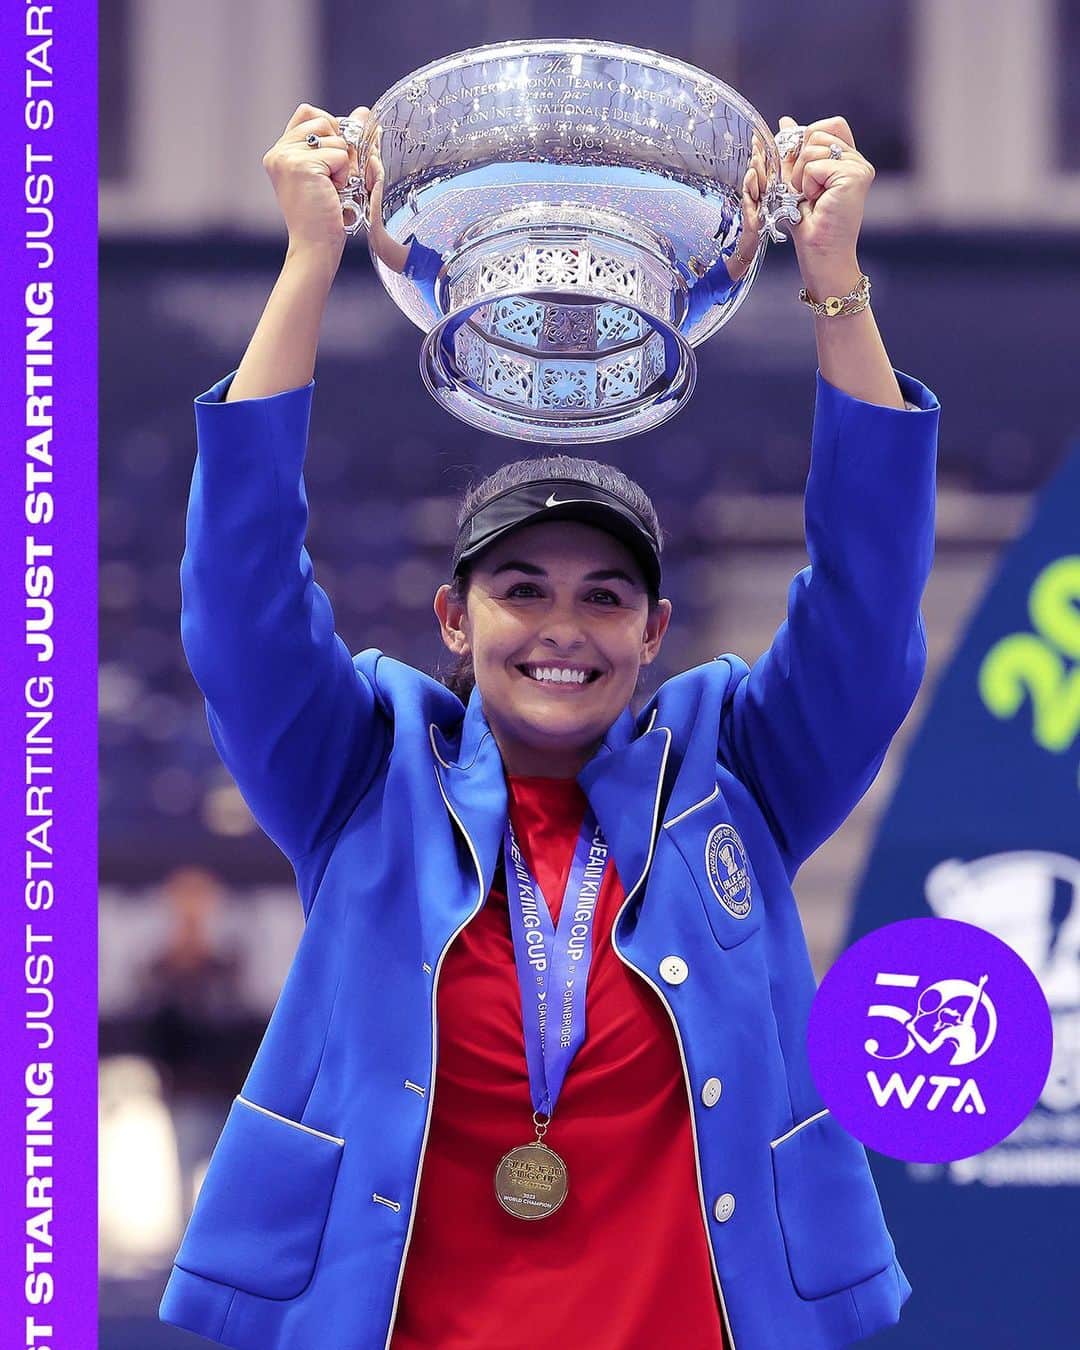 WTA（女子テニス協会）のインスタグラム：「As Canada celebrates its first @billiejeankingcup title, hats off to team captain and former WTA player @heidi.eltabakh 🇨🇦👏   A special shout out too to @alekswozniak87 who holds the Canadian record for most ties played (36) and most overall wins (40) in the competition – and indeed three cheers for all players who have represented their country with distinction over the past 60 years!   #WTA50 #JustStarting」